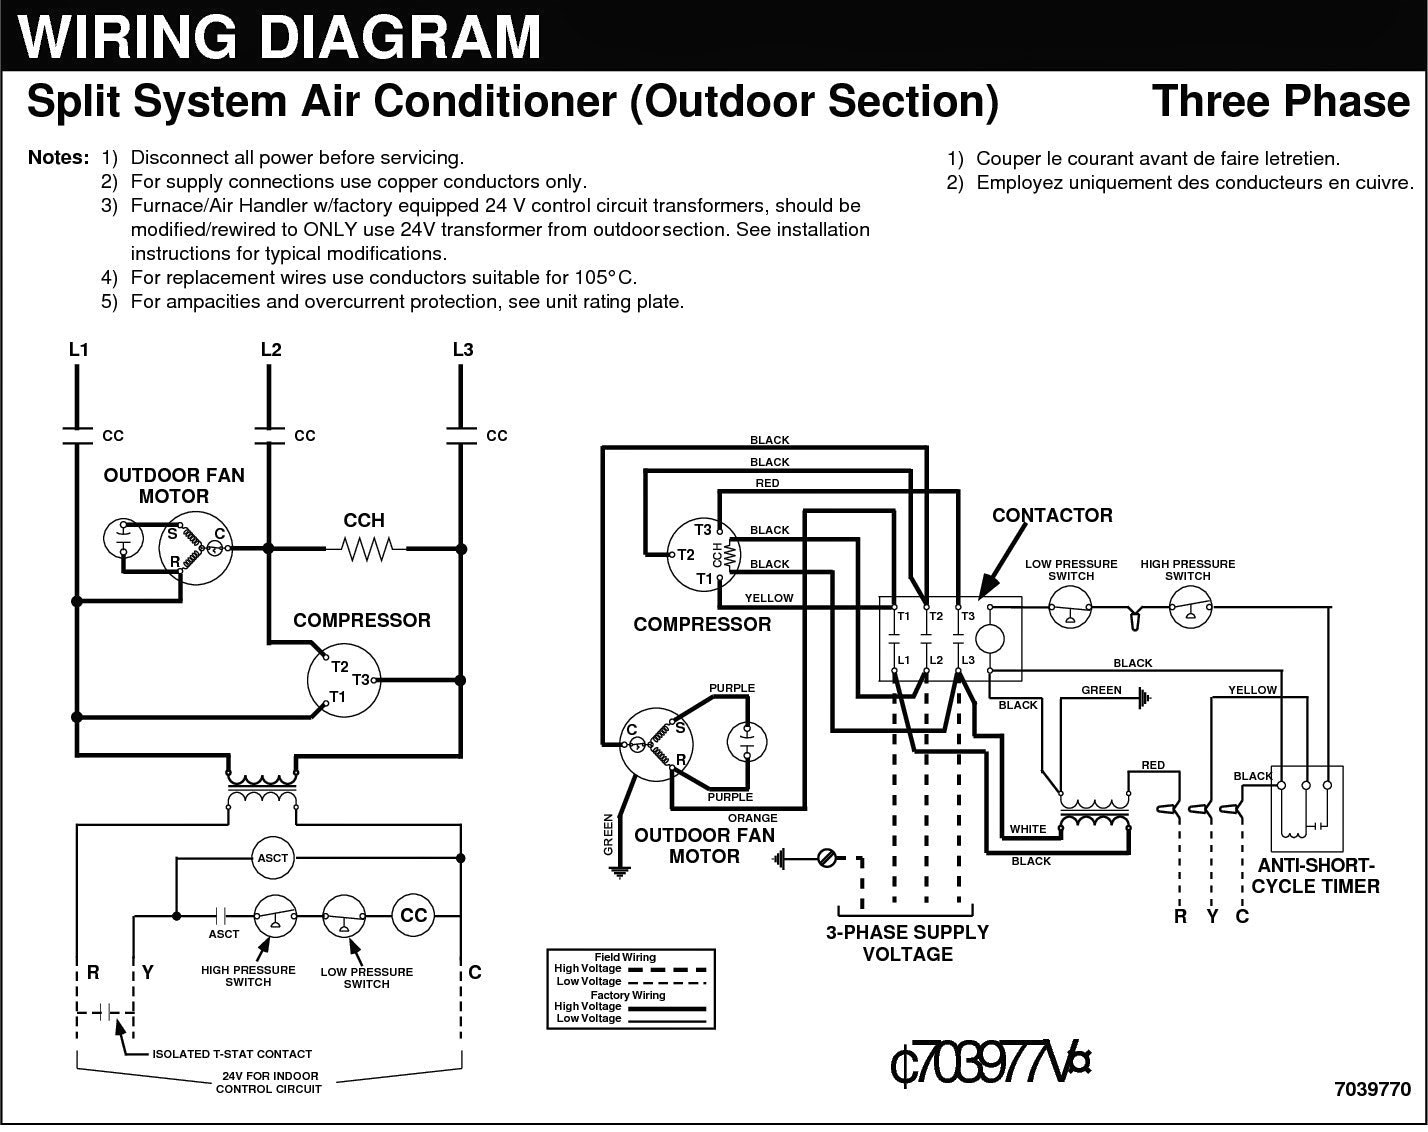 Generator Wiring Diagram 3 Phase To Unbelievable Rotary Switch For At